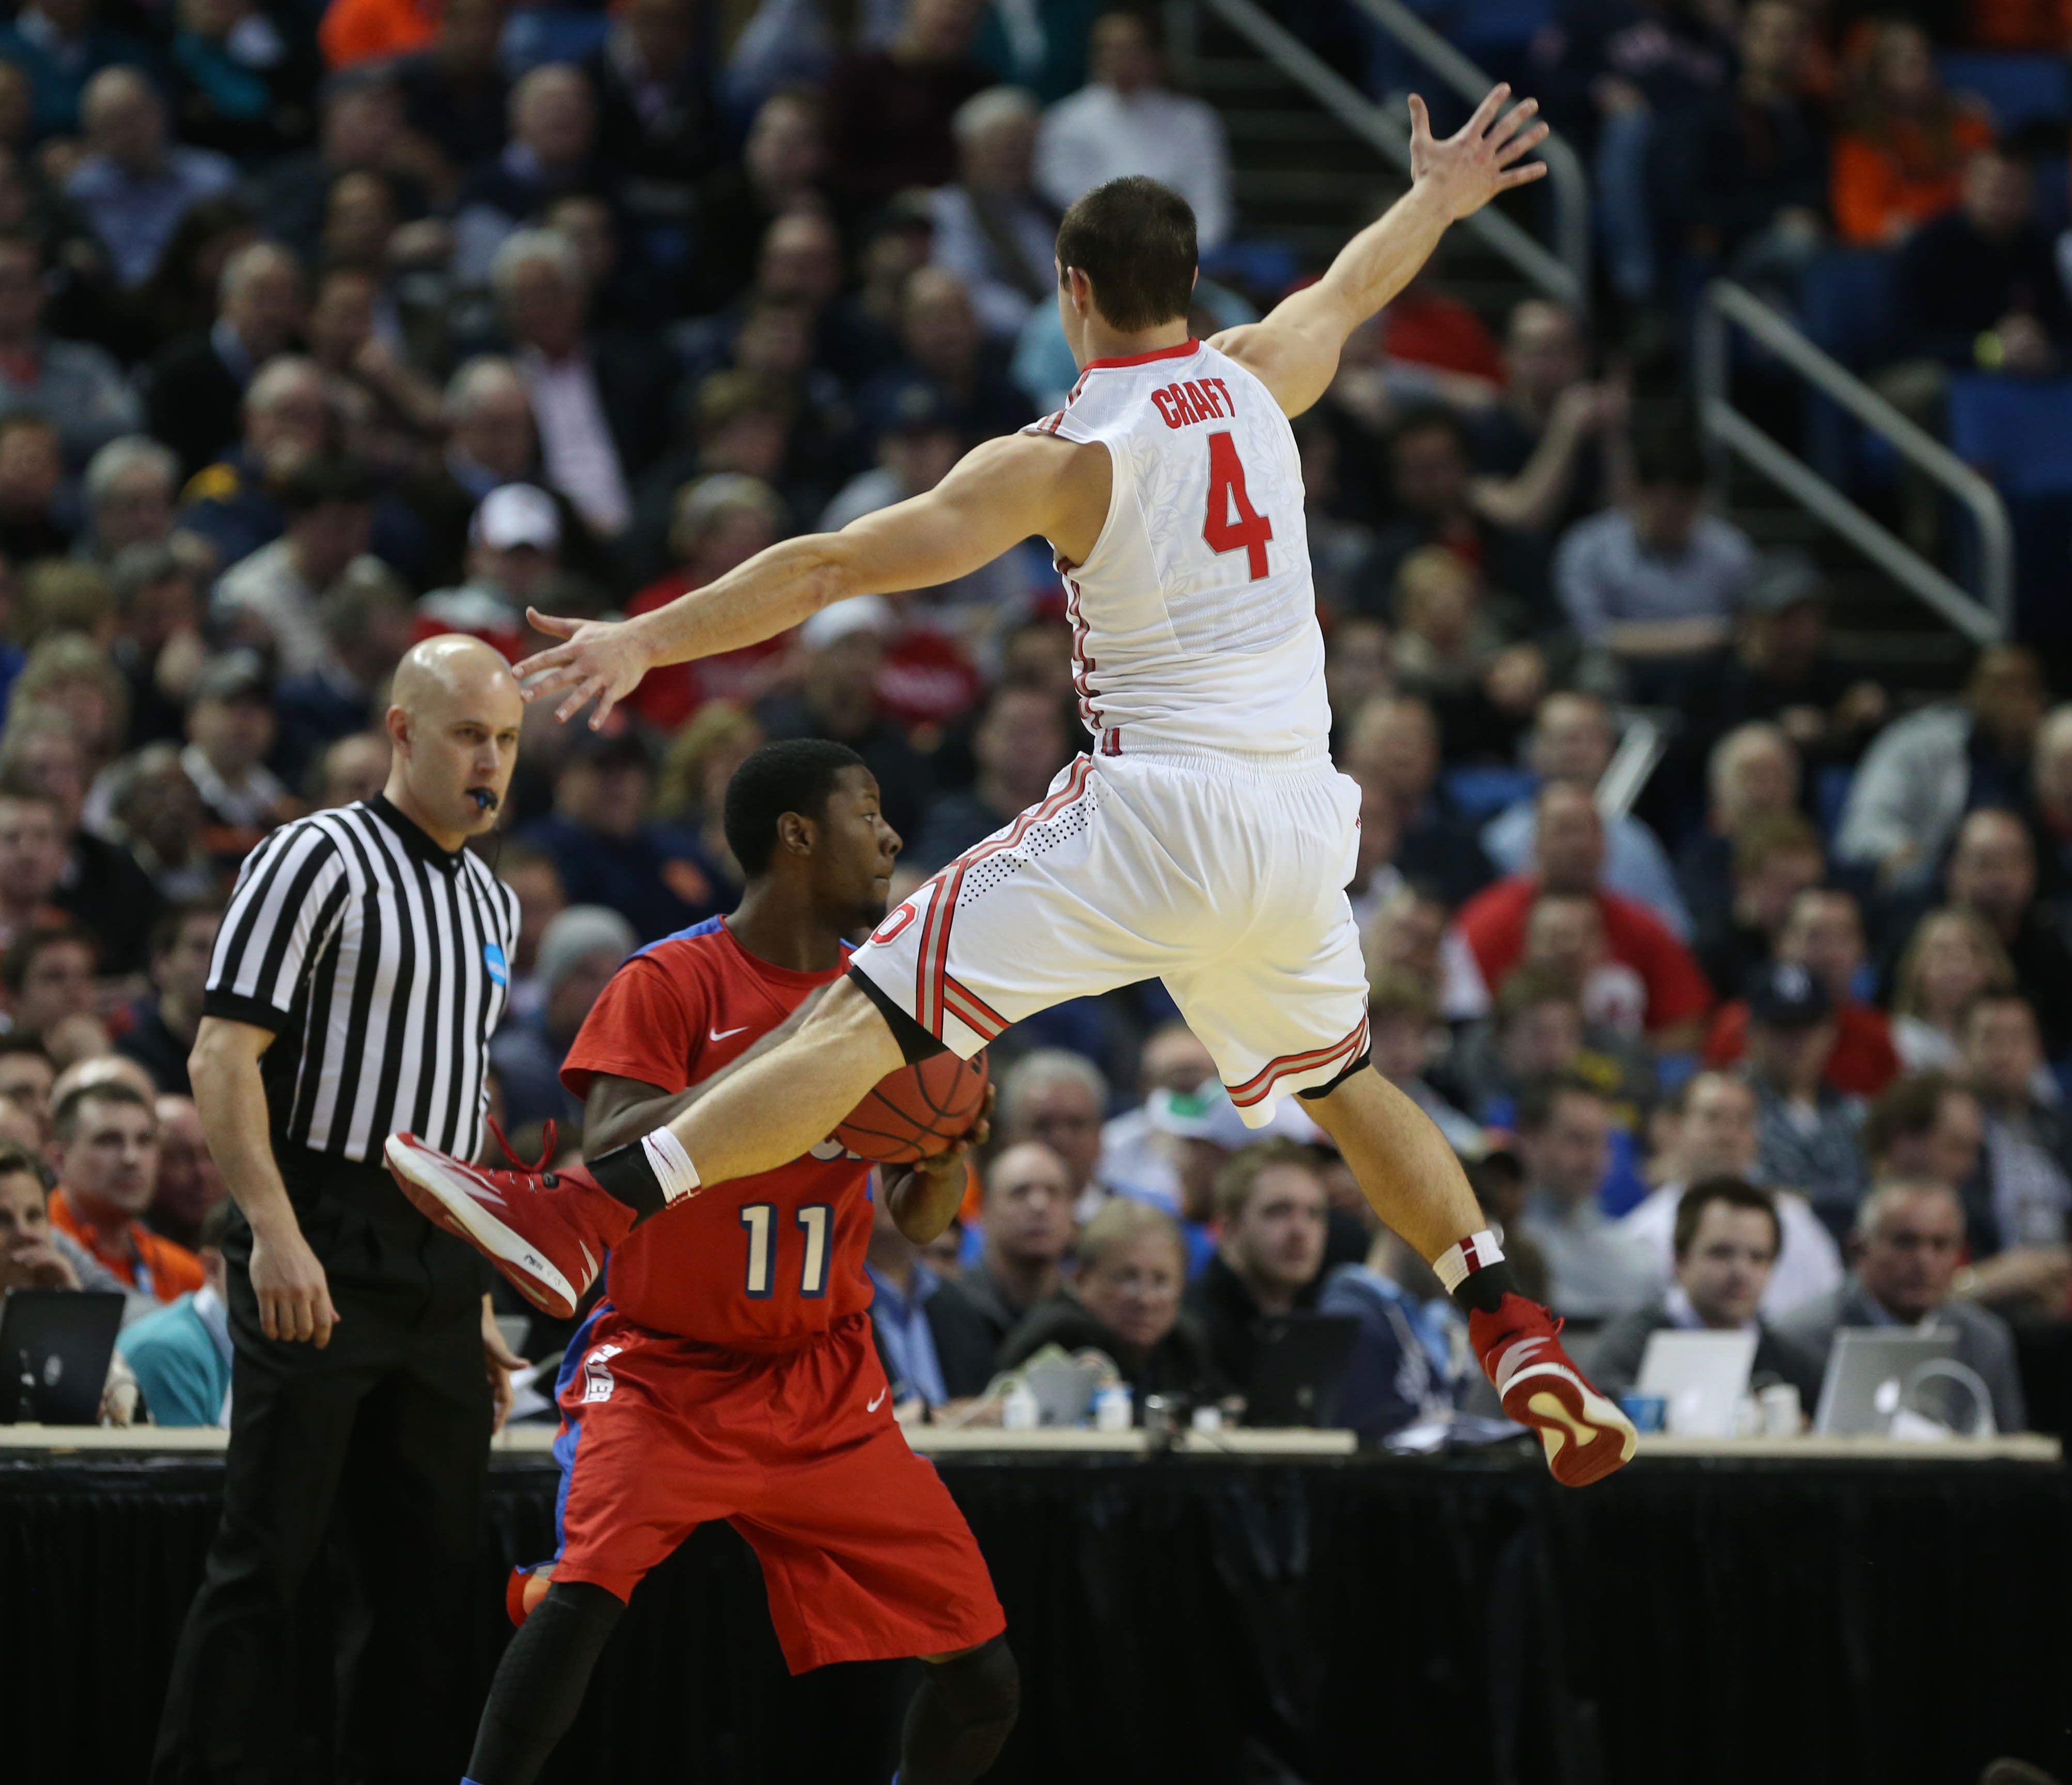 Ohio State's Aaron Craft (4) defends as Dayton's Scoochie Smith (11) tries to inbound the ball during the second half of a second-round game of the NCAA college basketball tournament in Buffalo, N.Y., Thursday, March 20, 2014. (Robert Kirkham—Buffalo News / AP)